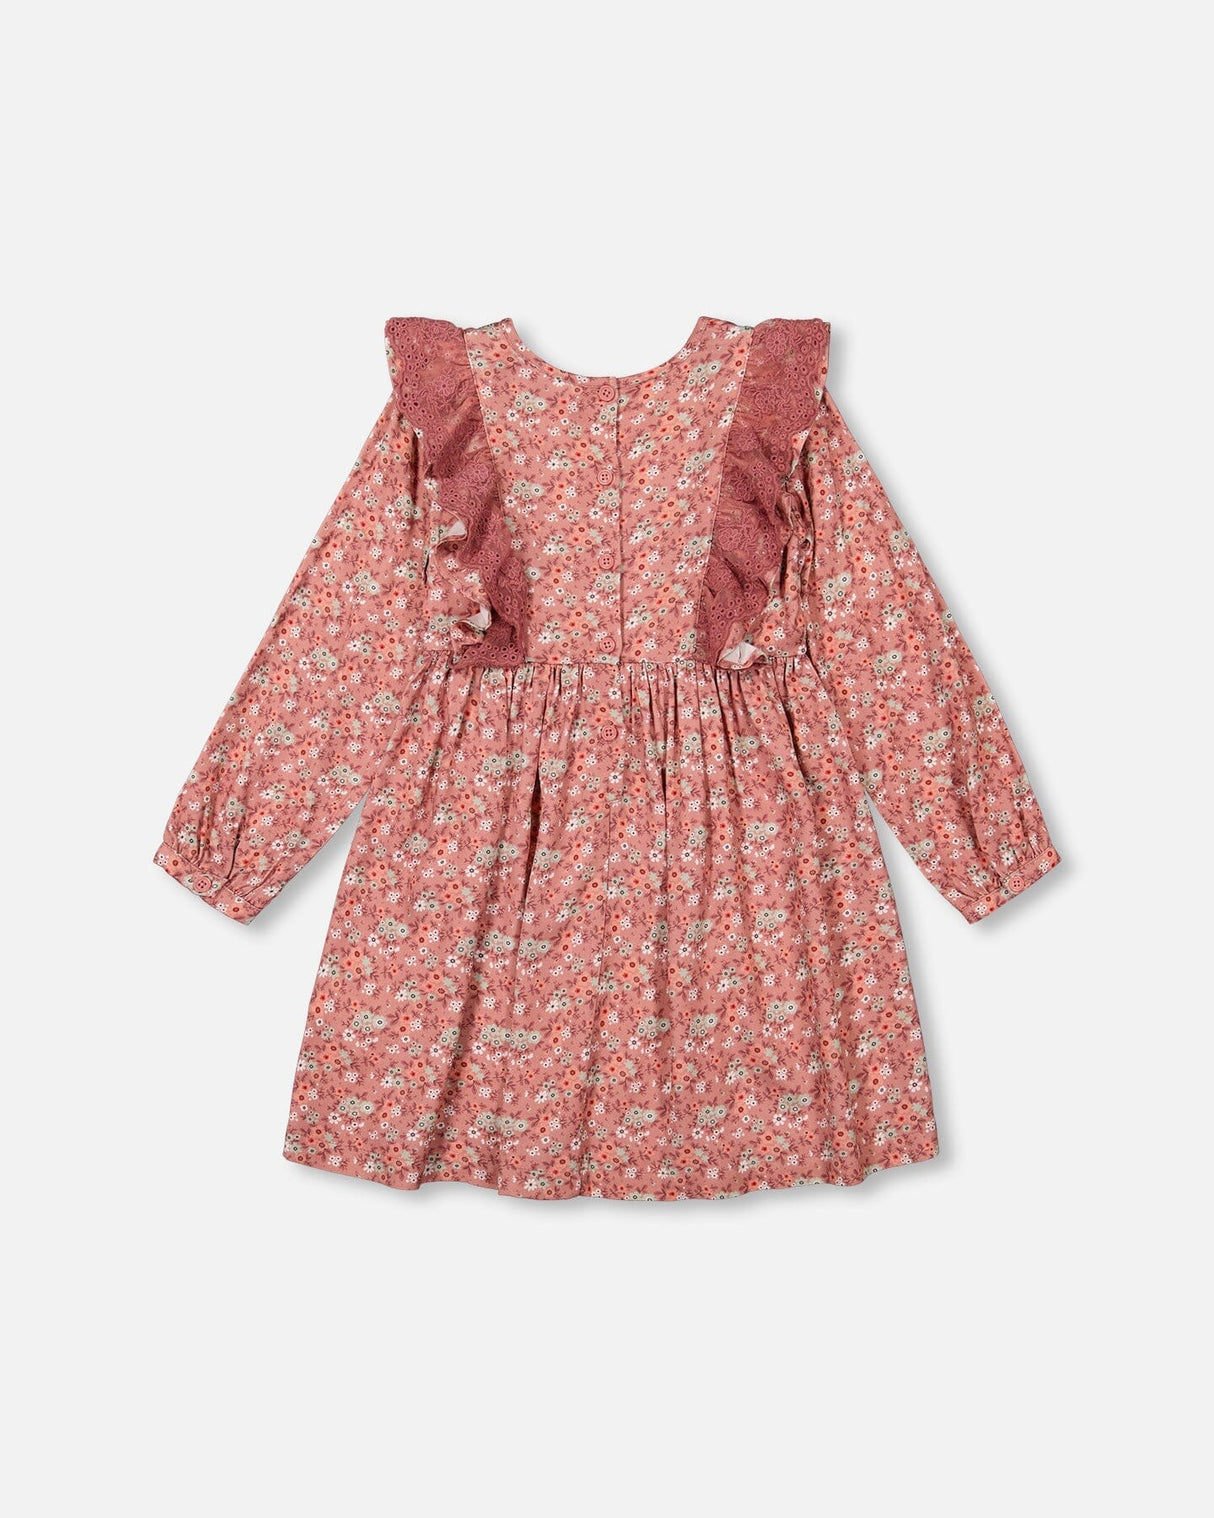 Printed Woven Dress With Frills Dusty Mauve Floral Print-2